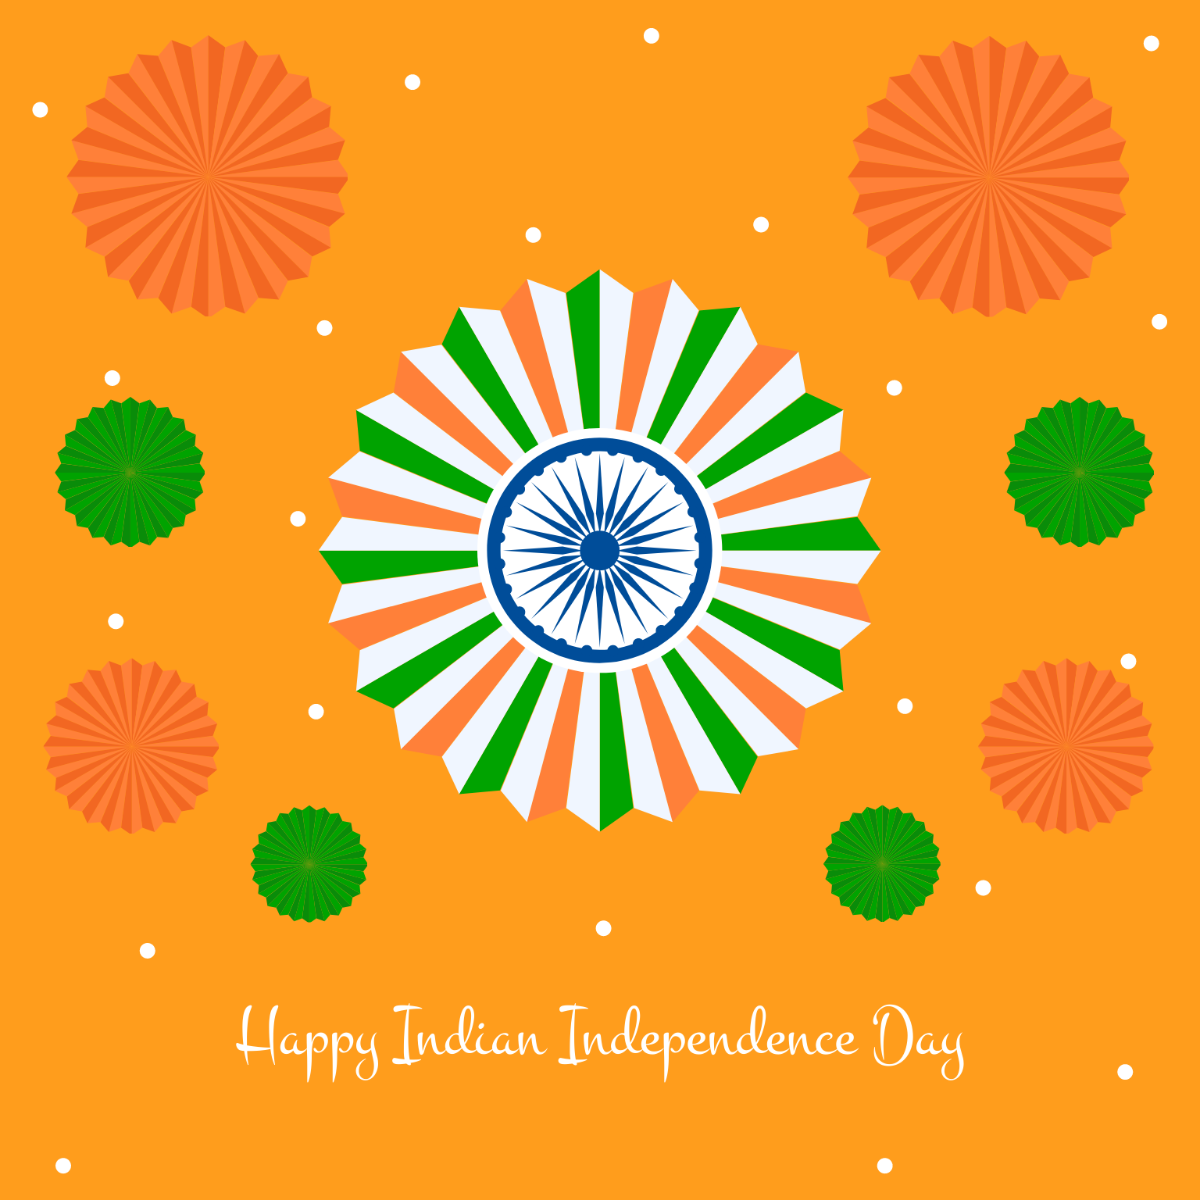 Free India Independence Day Wishes Clipart Template